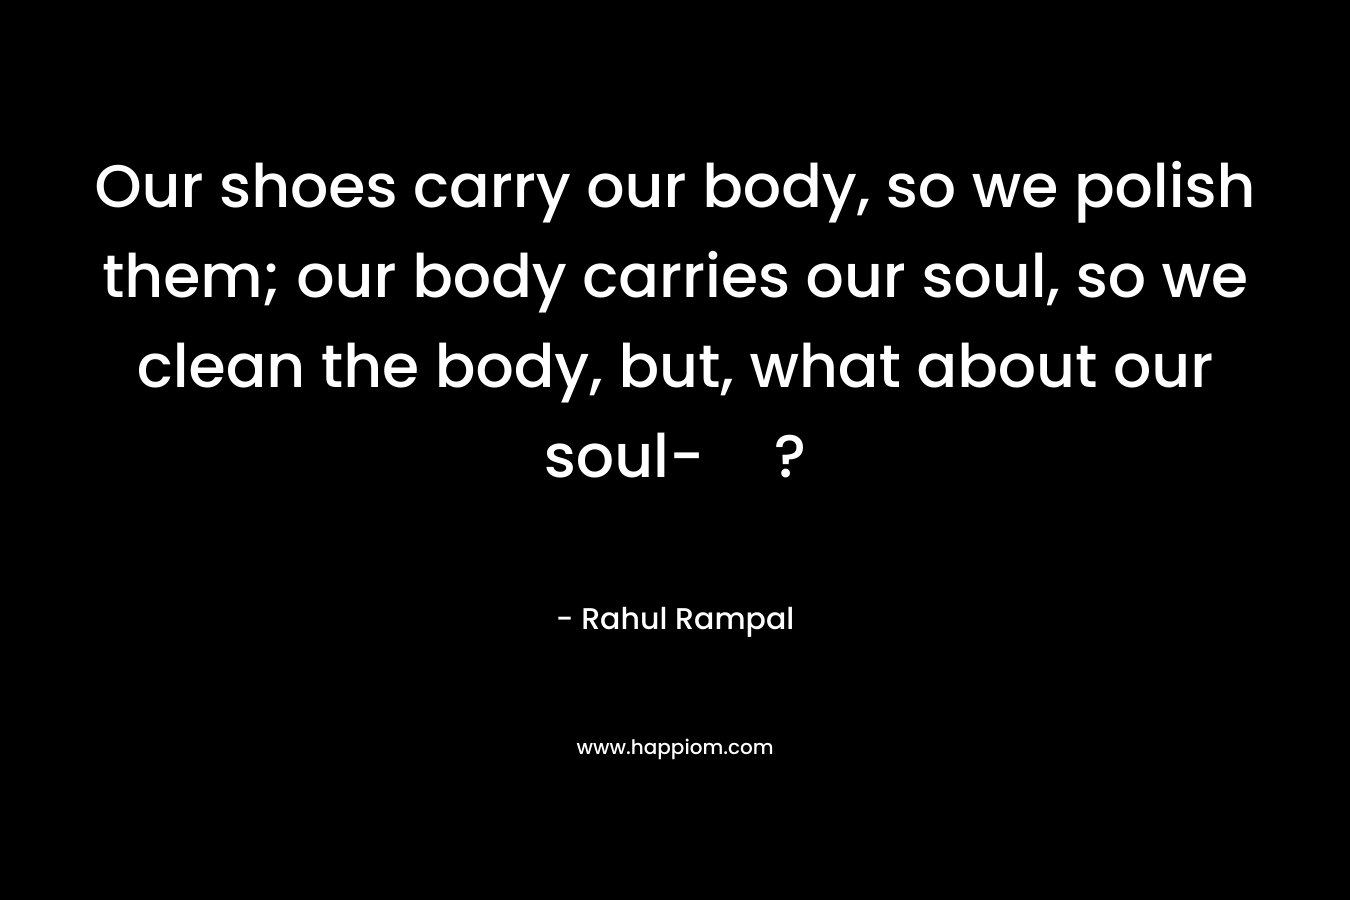 Our shoes carry our body, so we polish them; our body carries our soul, so we clean the body, but, what about our soul-?